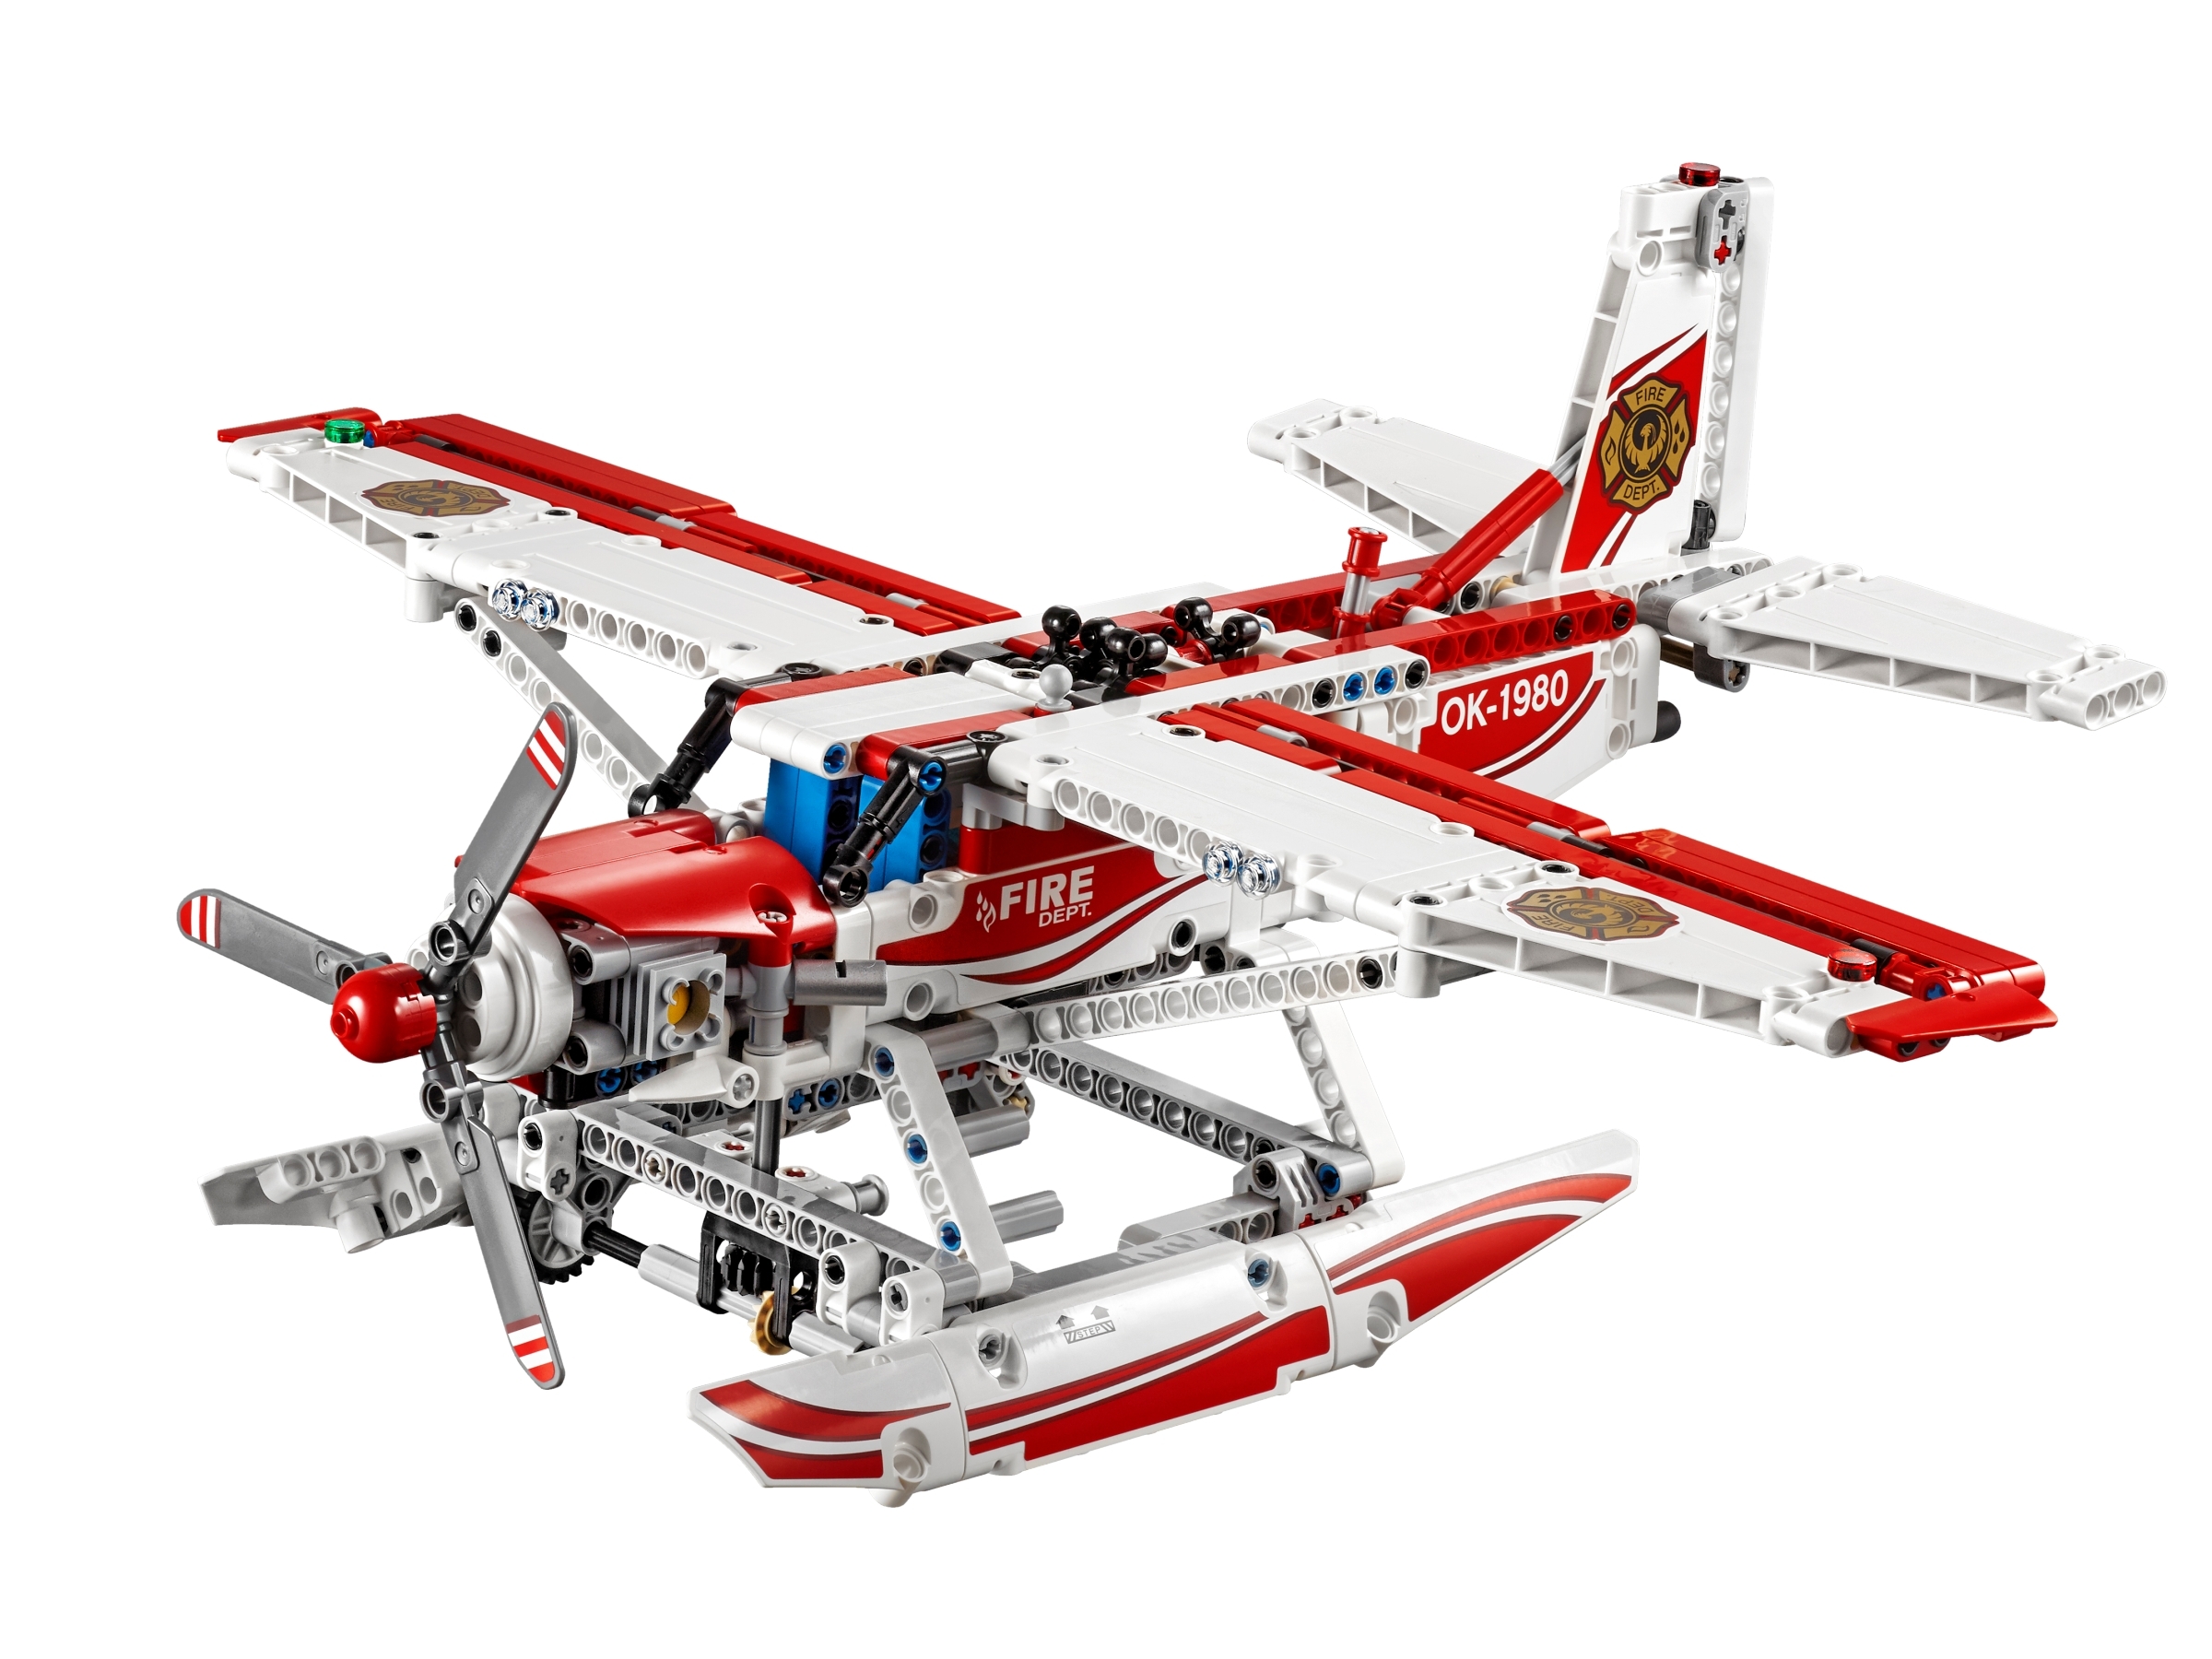 Fire Plane 42040 Technic™ | Buy online at Official Shop US